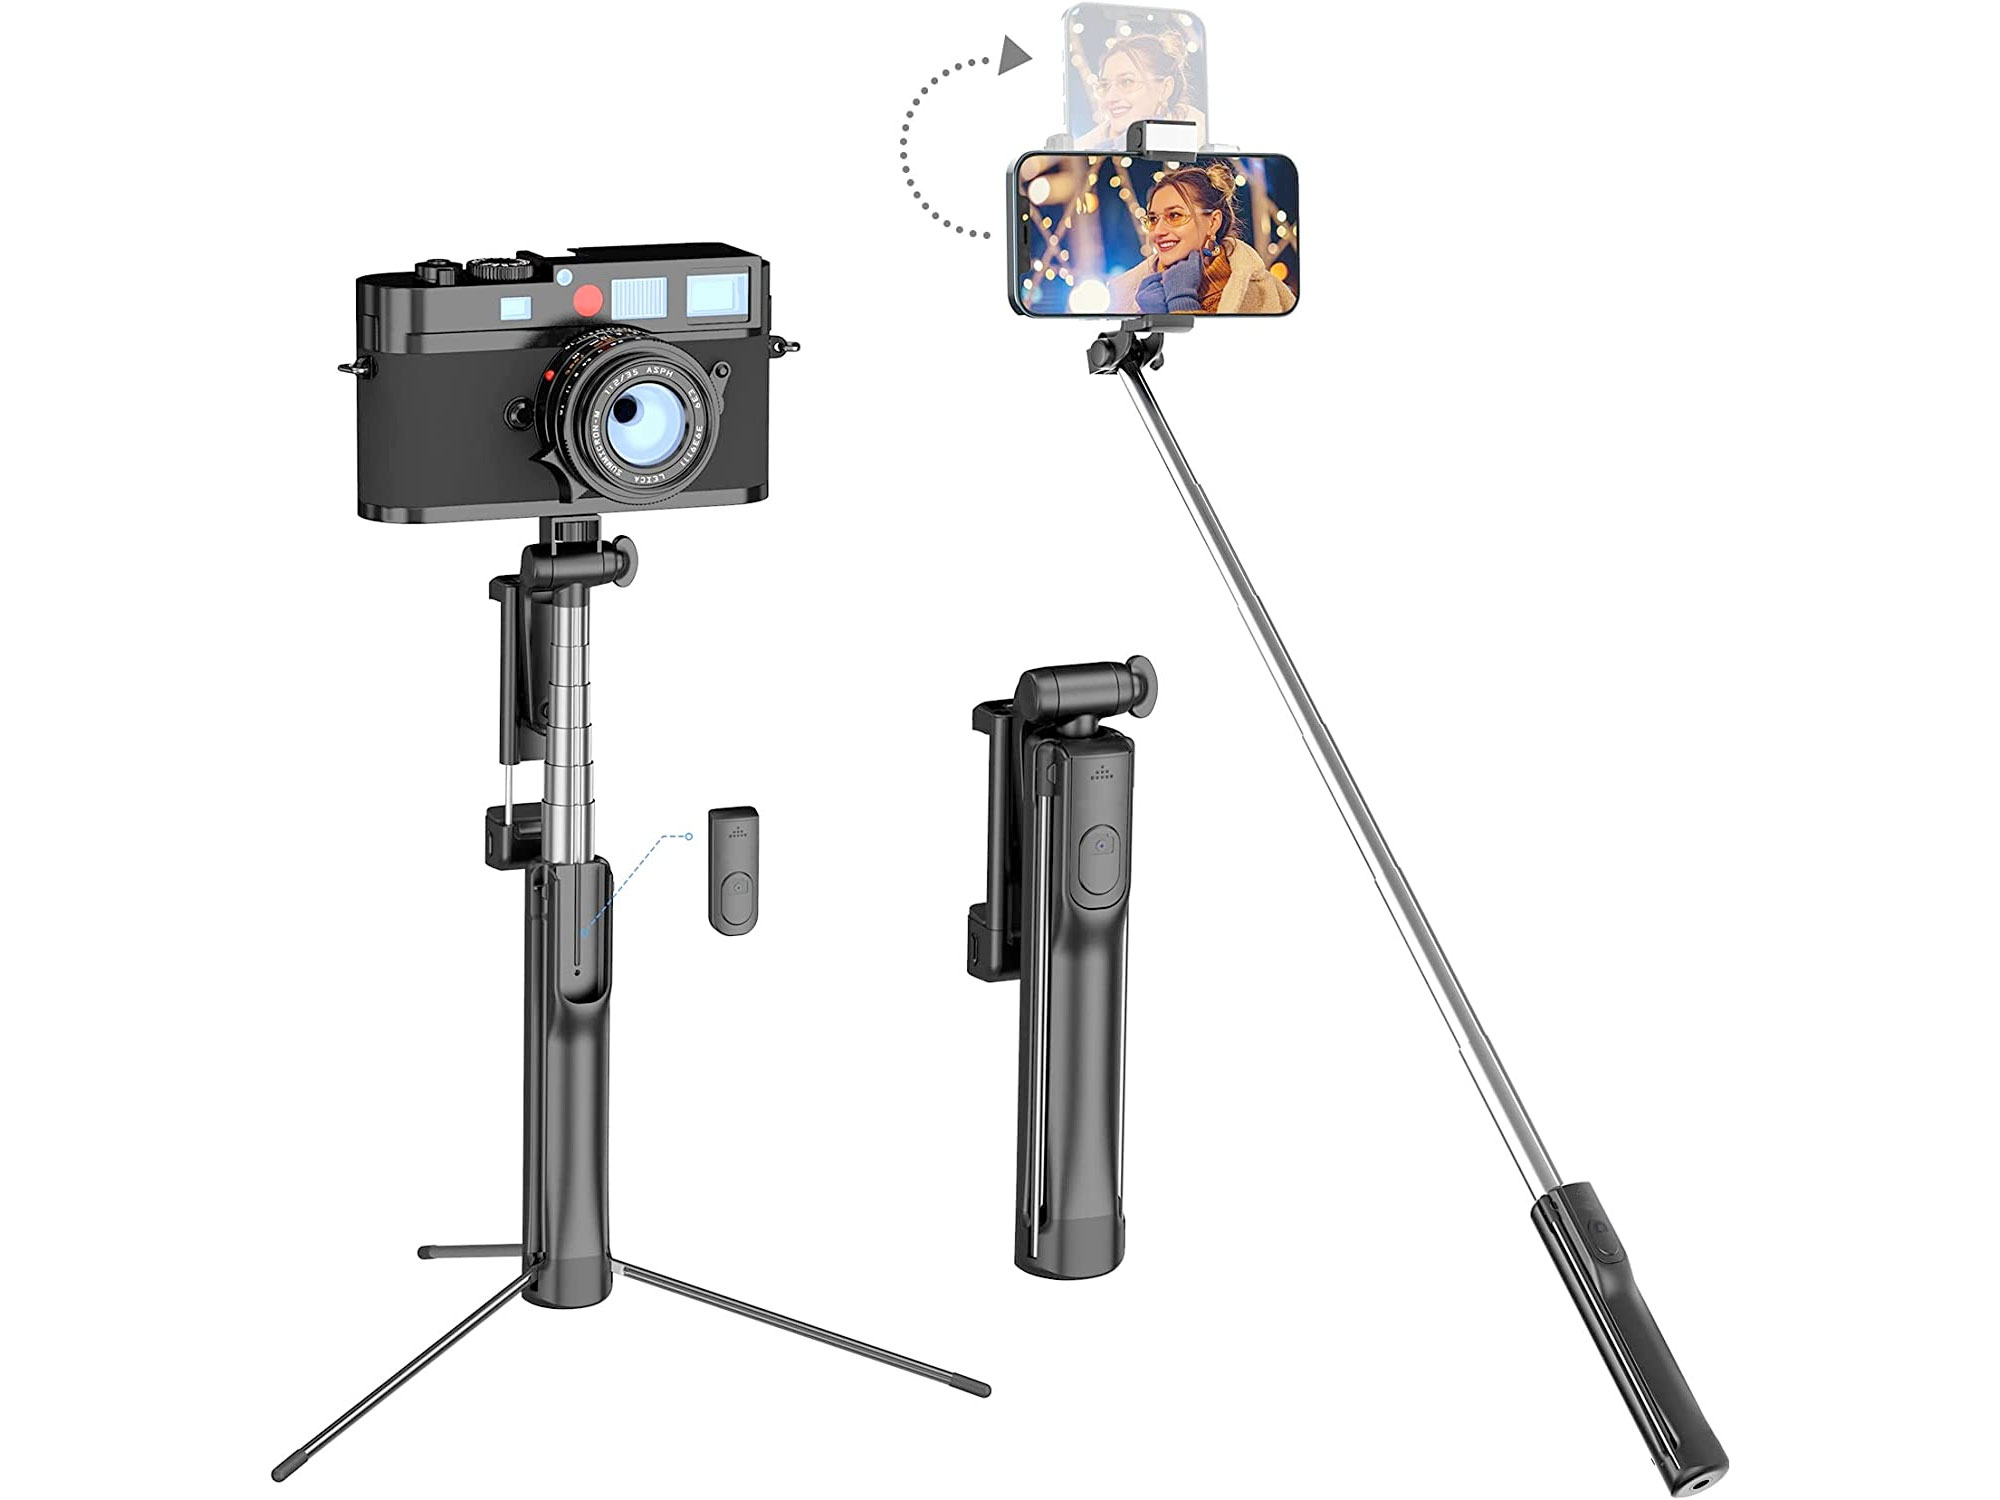 Amazon：Selfie Stick Tripod with Fill-in Light and Remote只賣$9.35